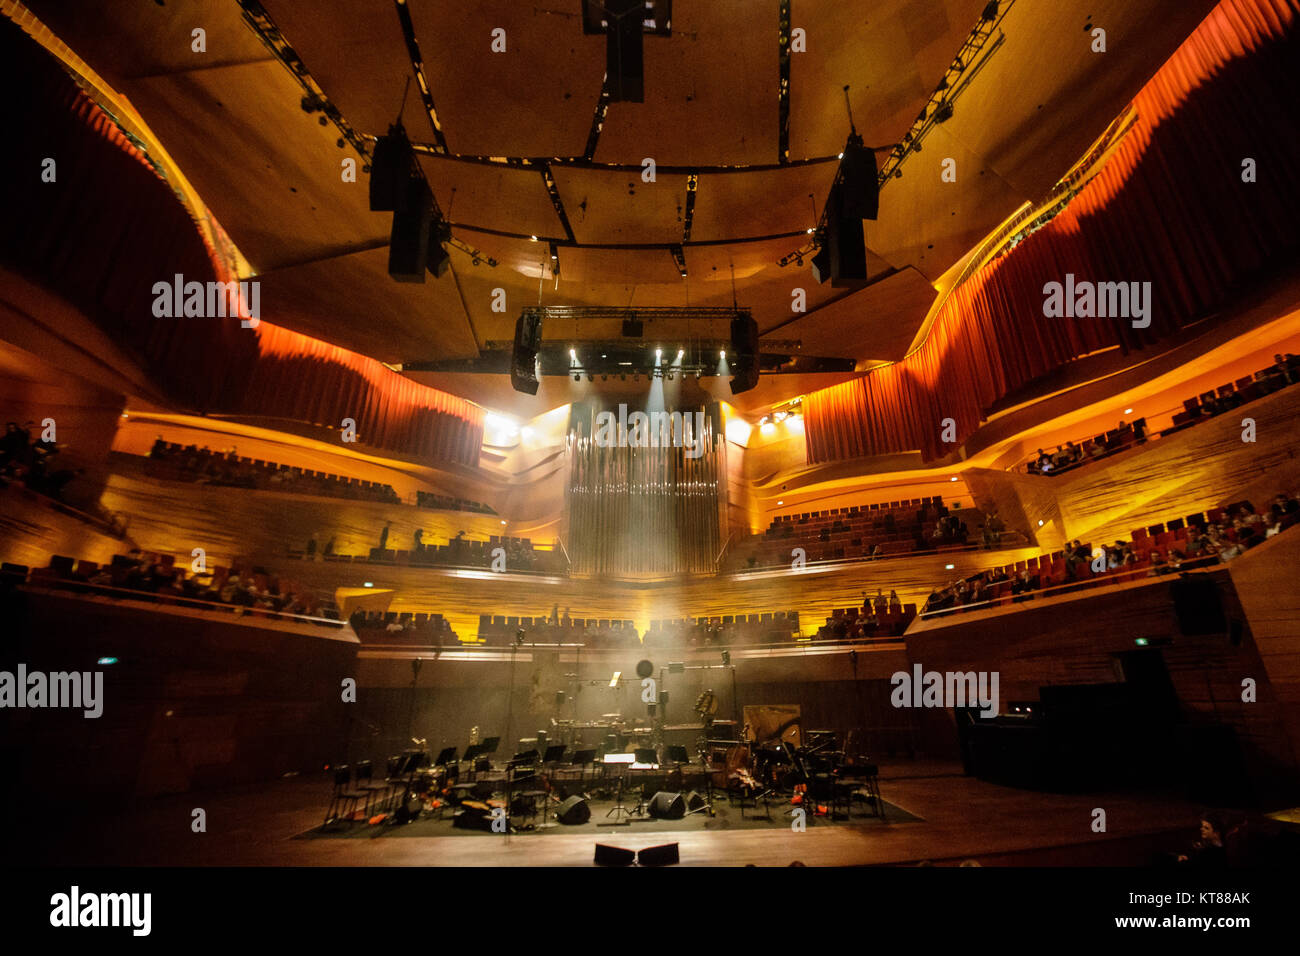 DR Koncerthuset has a total surface of 25,000 m2, the concert hall complex designed by Jean Nouvel includes a concert hall of 1800 people and three recording studios with variable acoustics. Denmark, 16/01 2017. Stock Photo